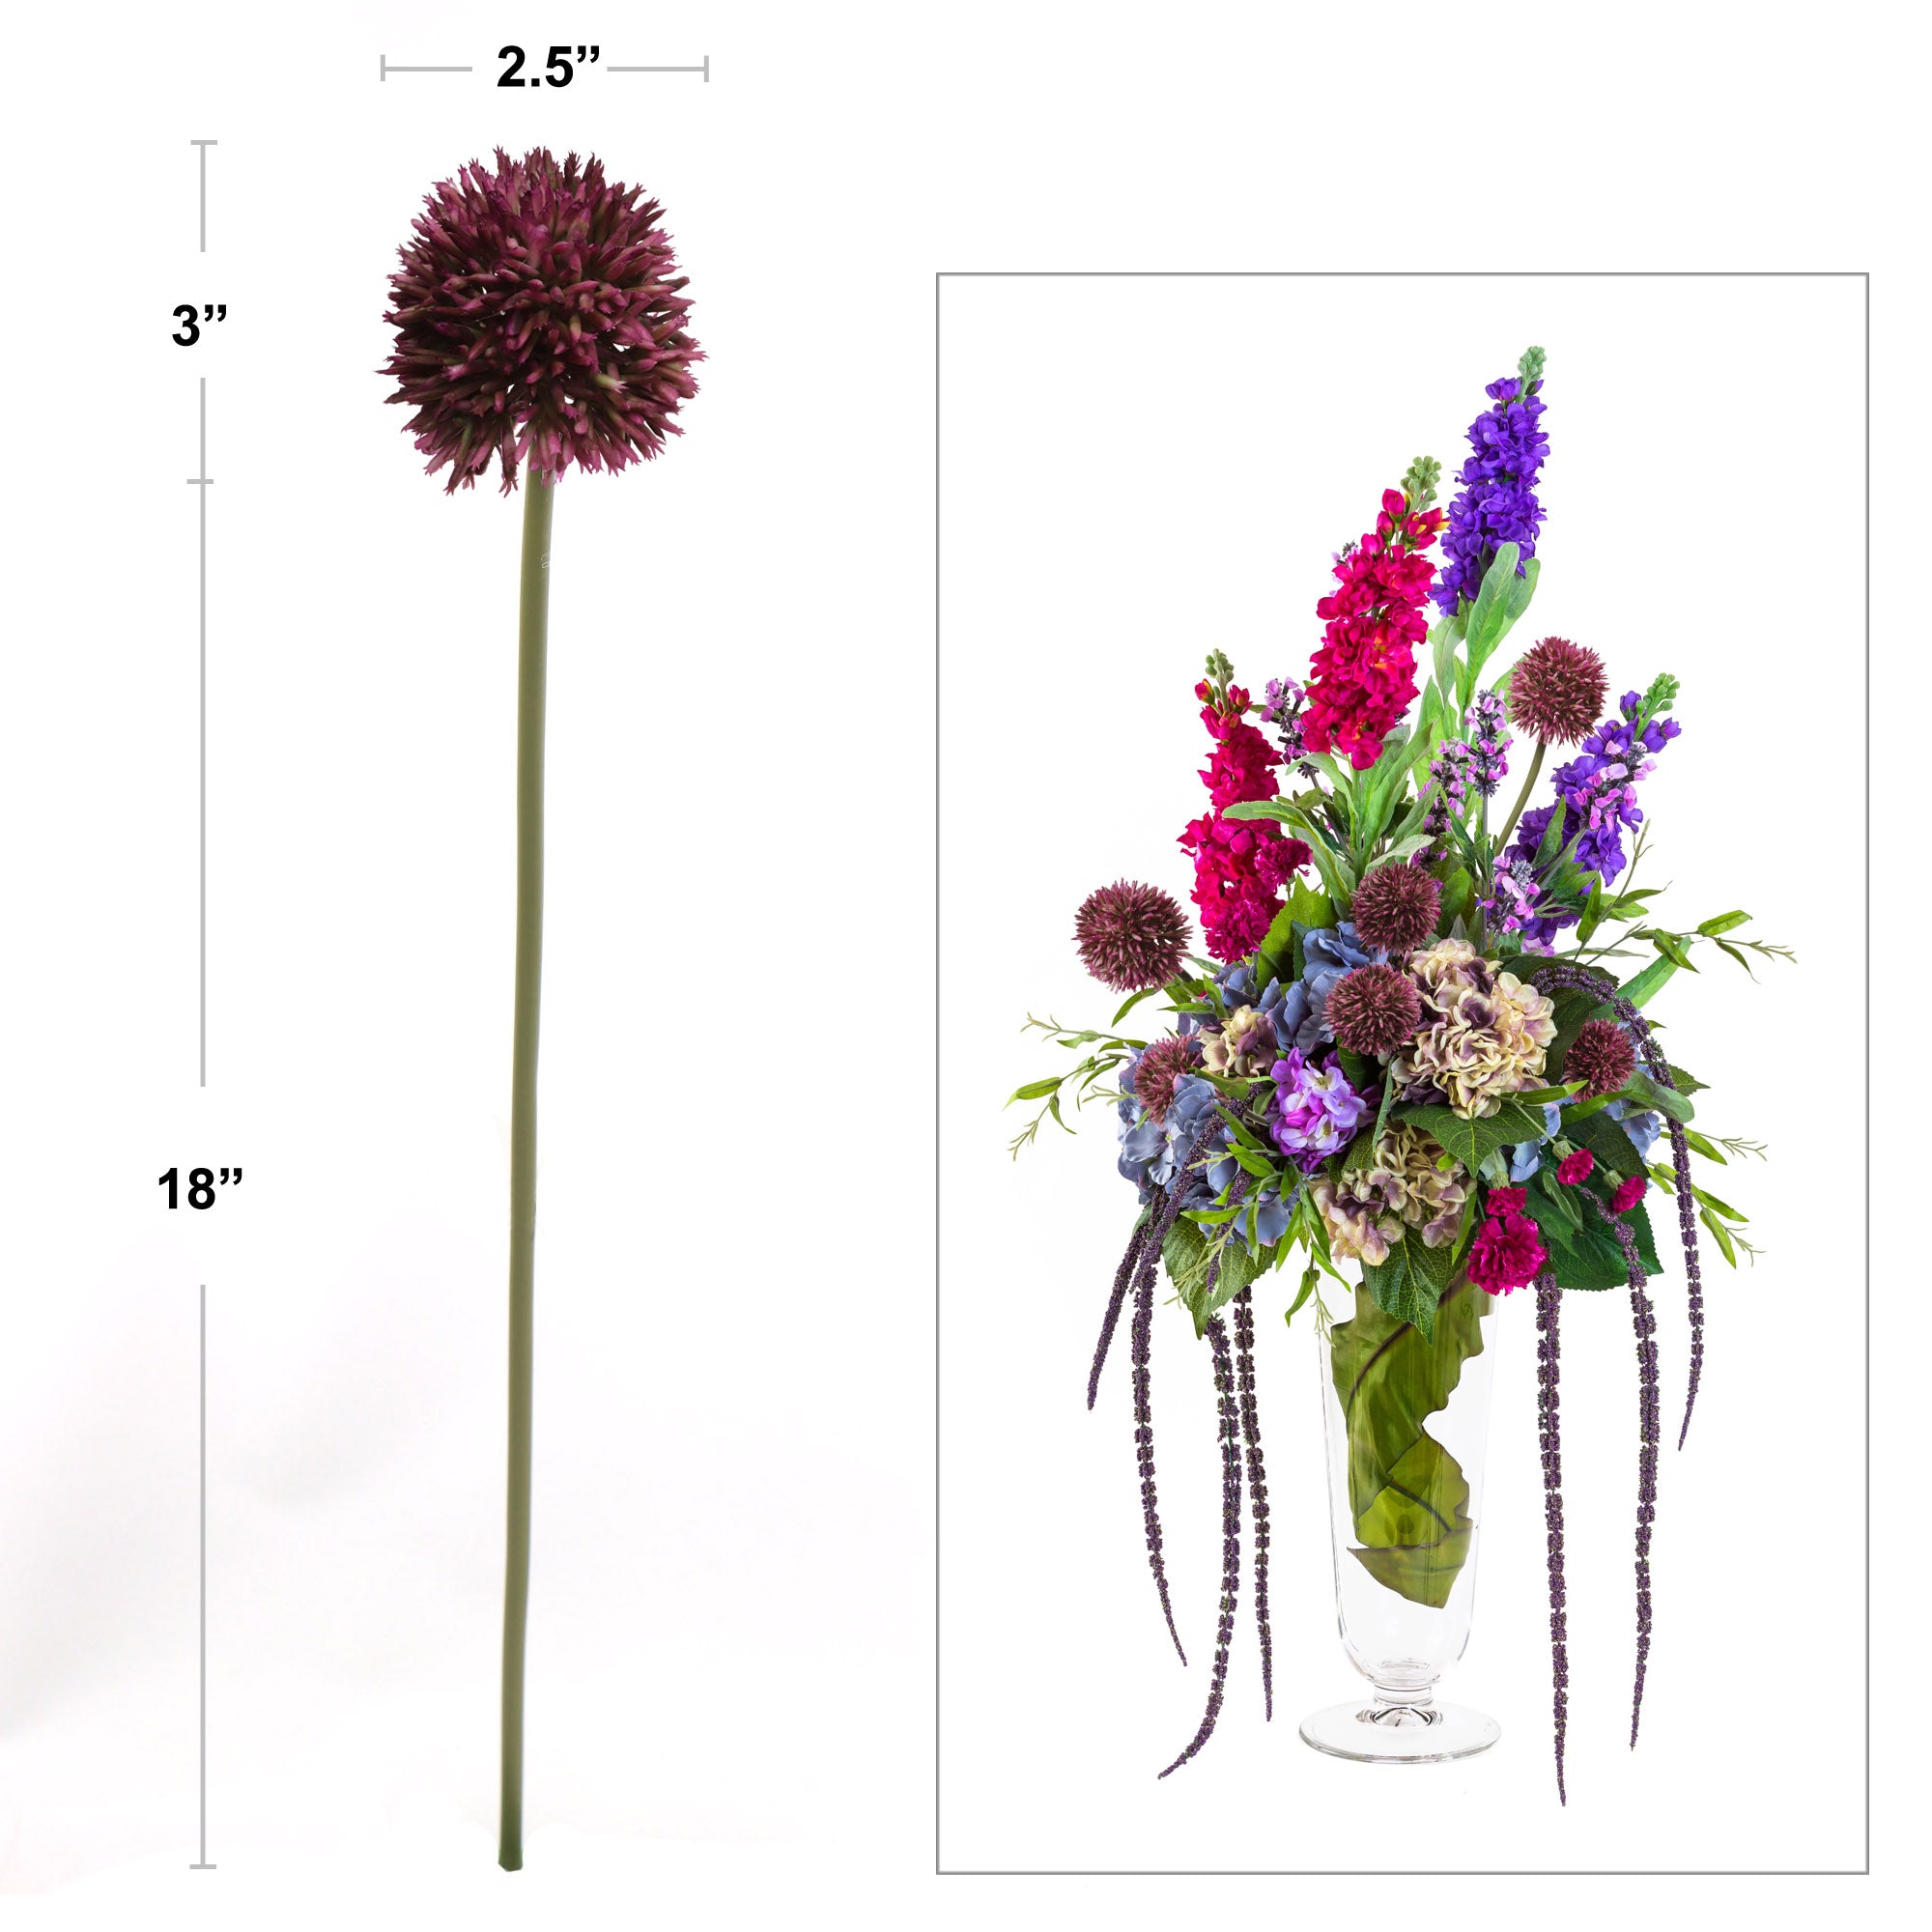 Vibrant 21" Purple Allium Ball - Eye-Catching Decorative Floral Sphere for Home, Garden, and Events